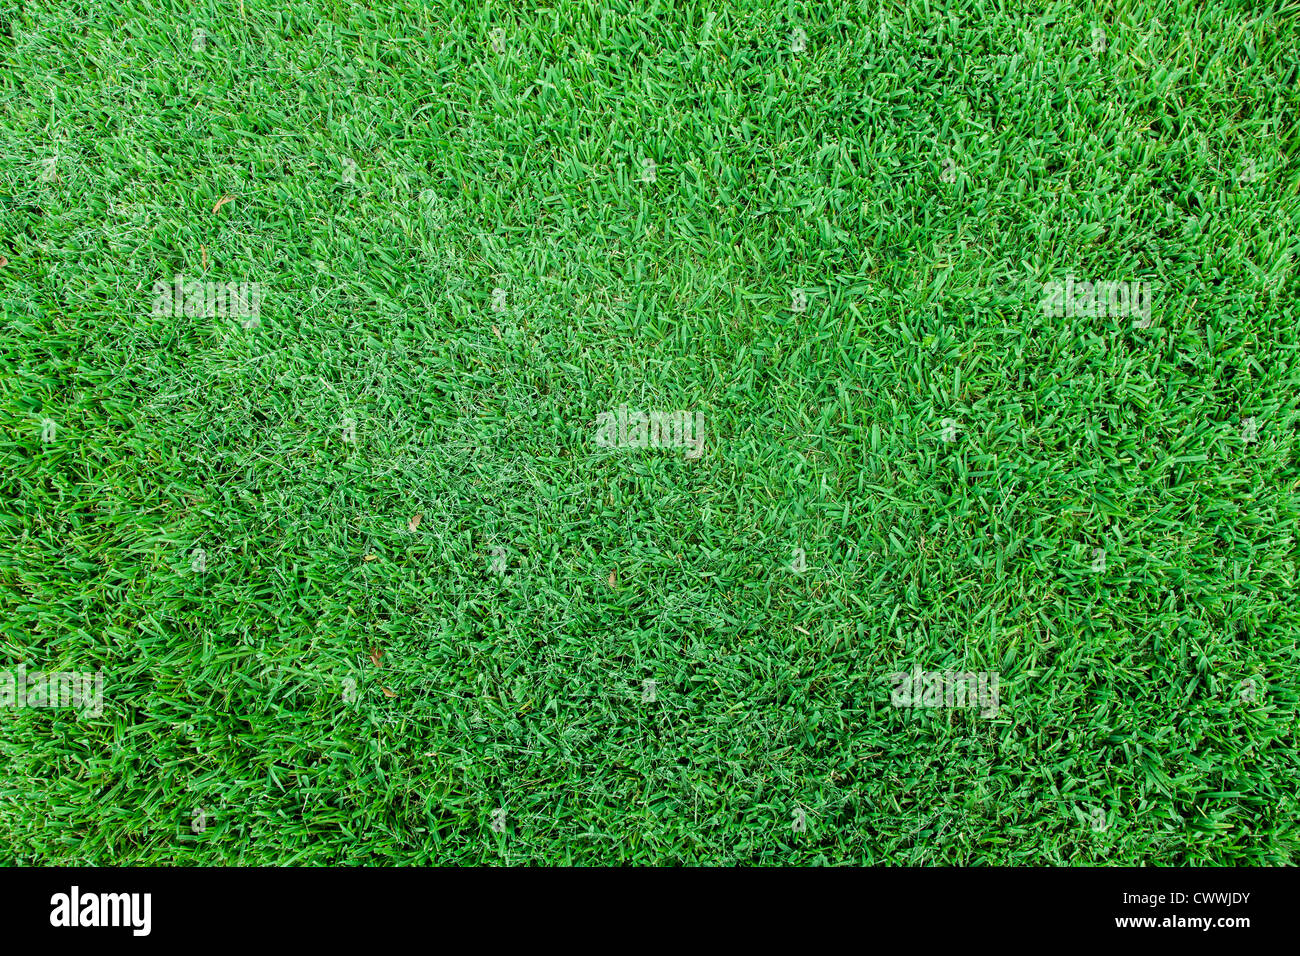 Cut grass seen from above Stock Photo